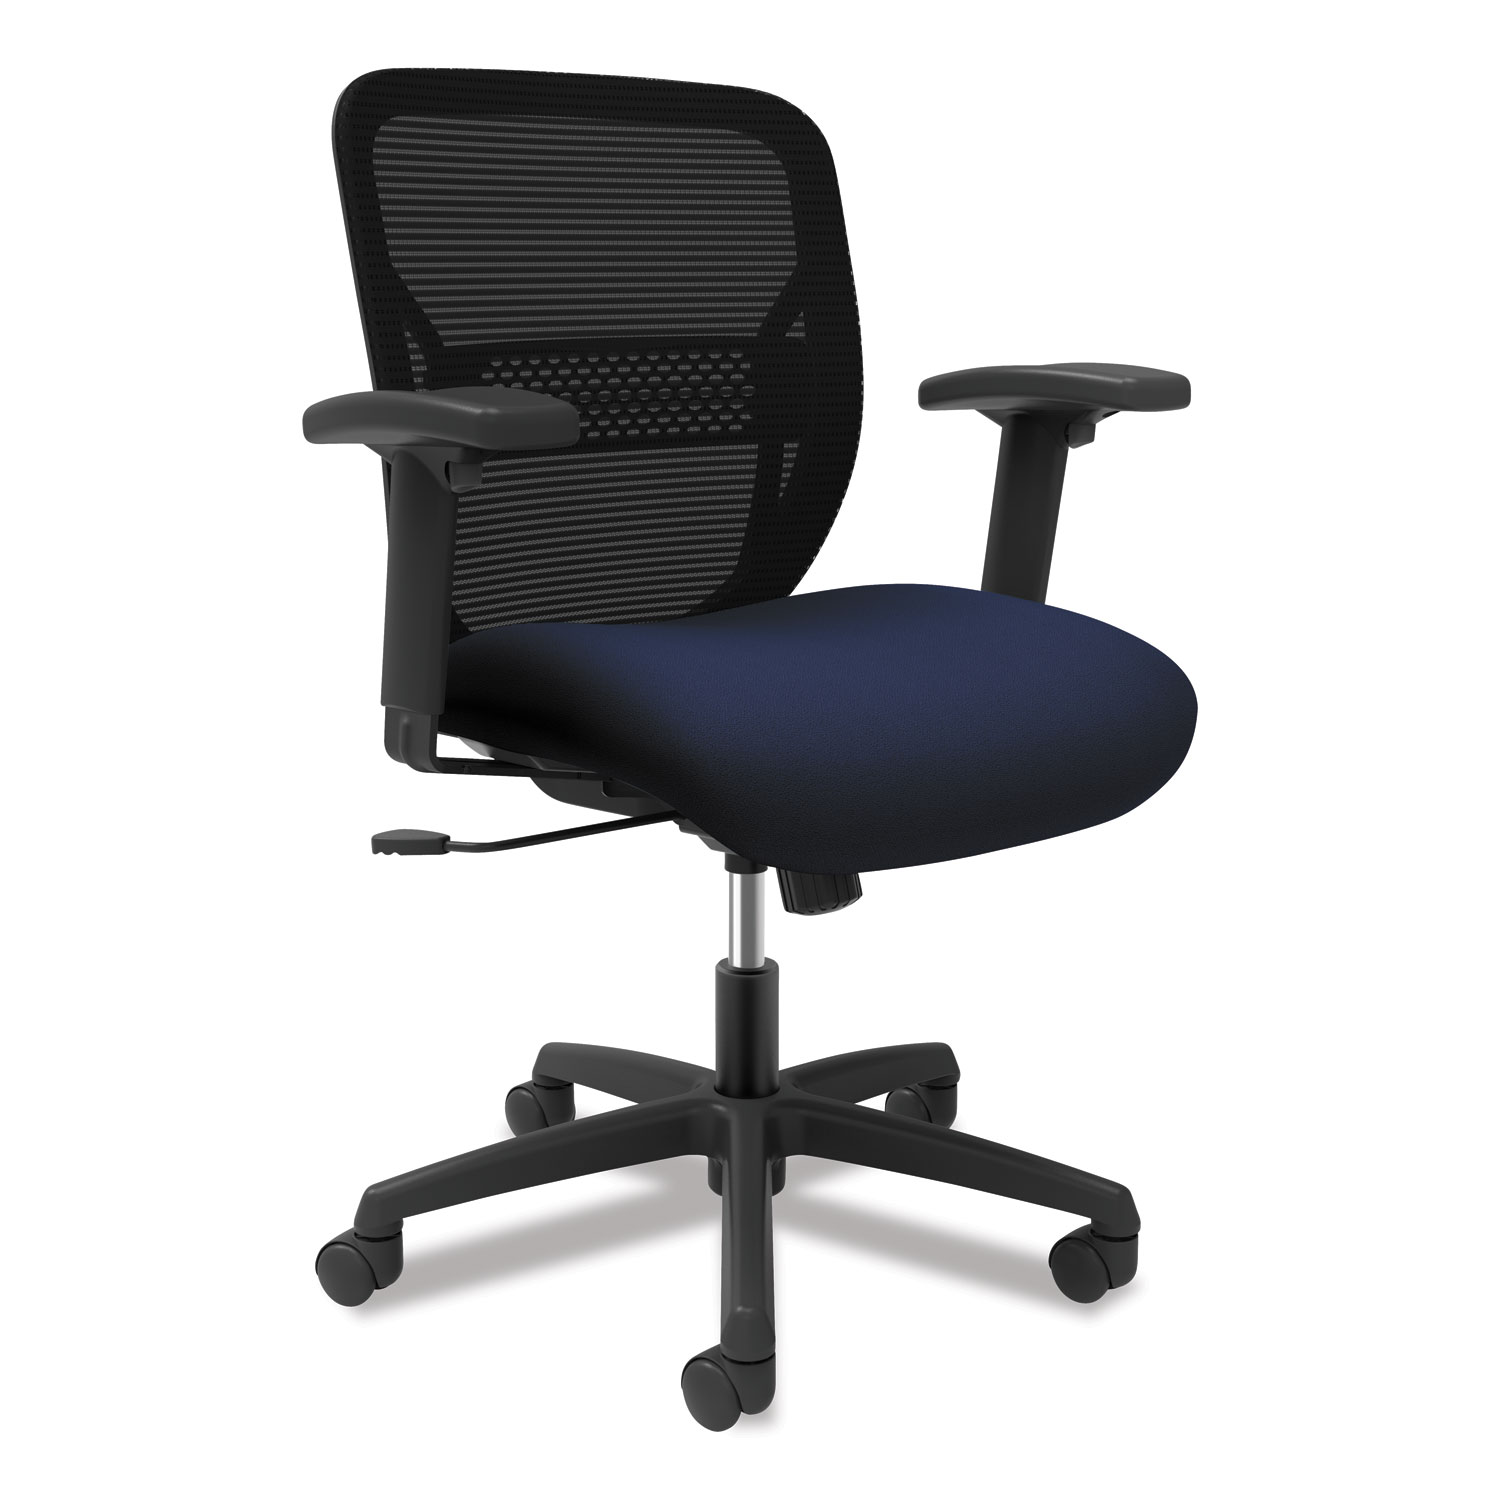  HON HONGTHMZ1CU98 Gateway Mid-Back Task Chair with Adjustable Arms, Supports Up to 250 lbs, Navy Seat, Black Back, Black Base (HONGTHMZ1CU98) 